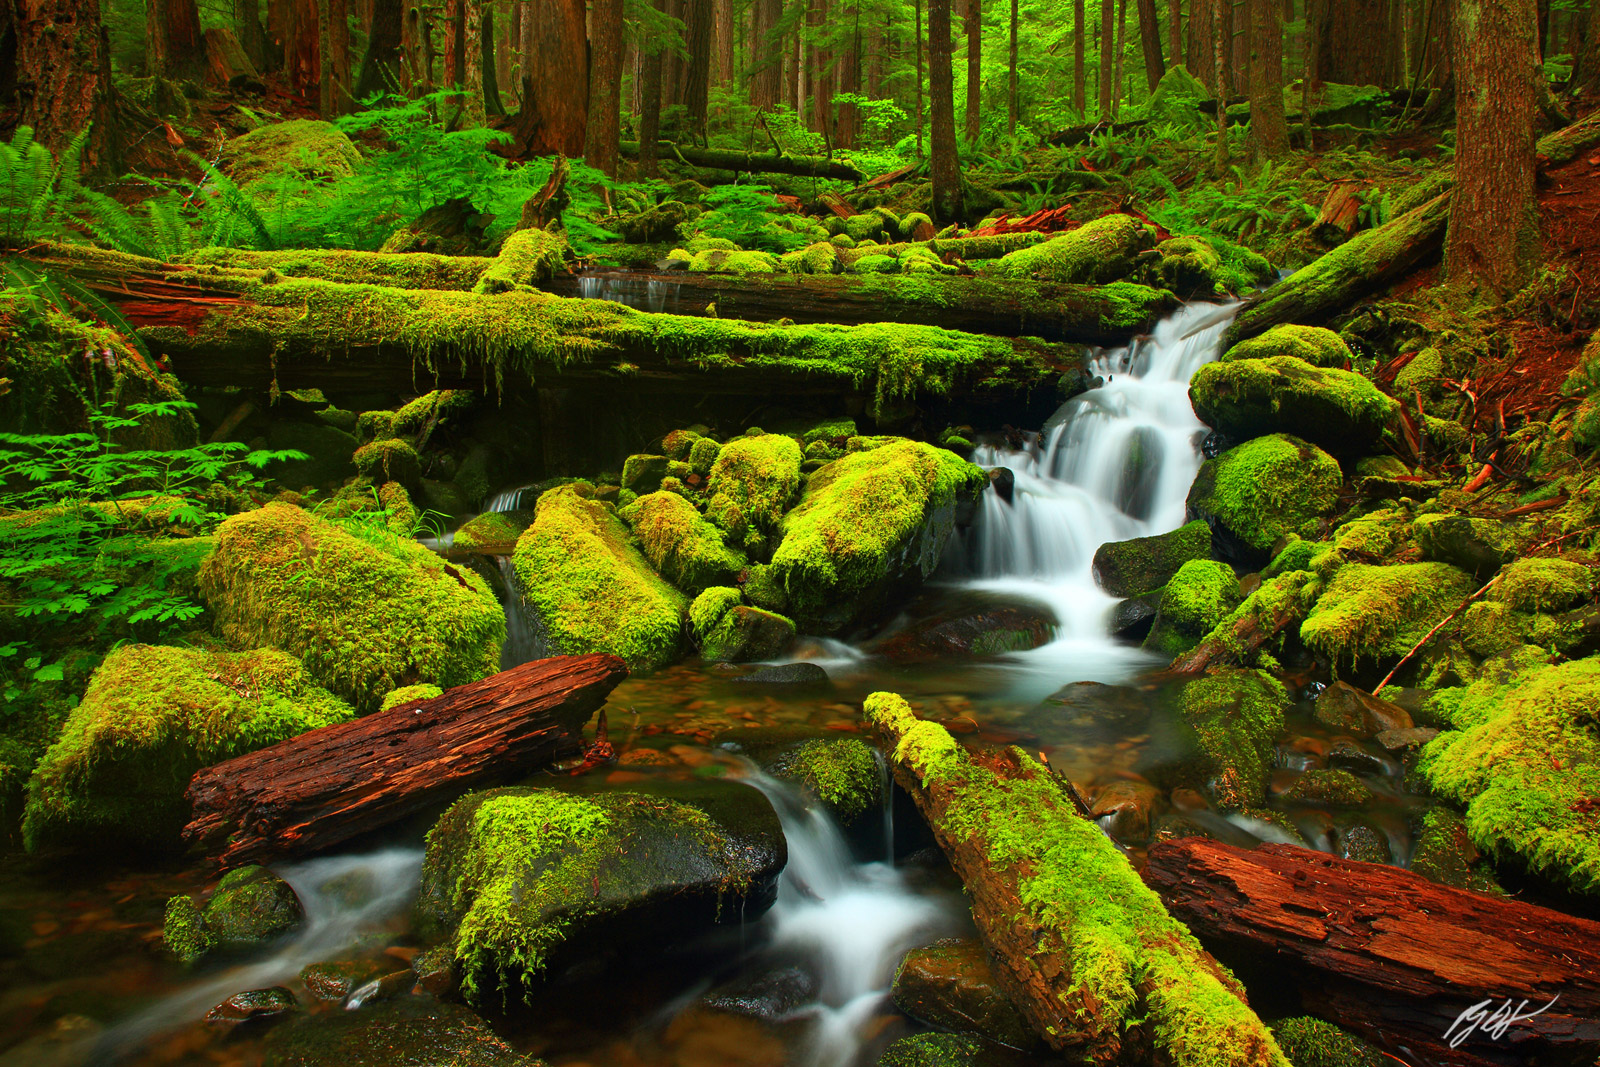 Mossy Creek along the Sol Duk Falls Trail in Olympic National Park in Washington